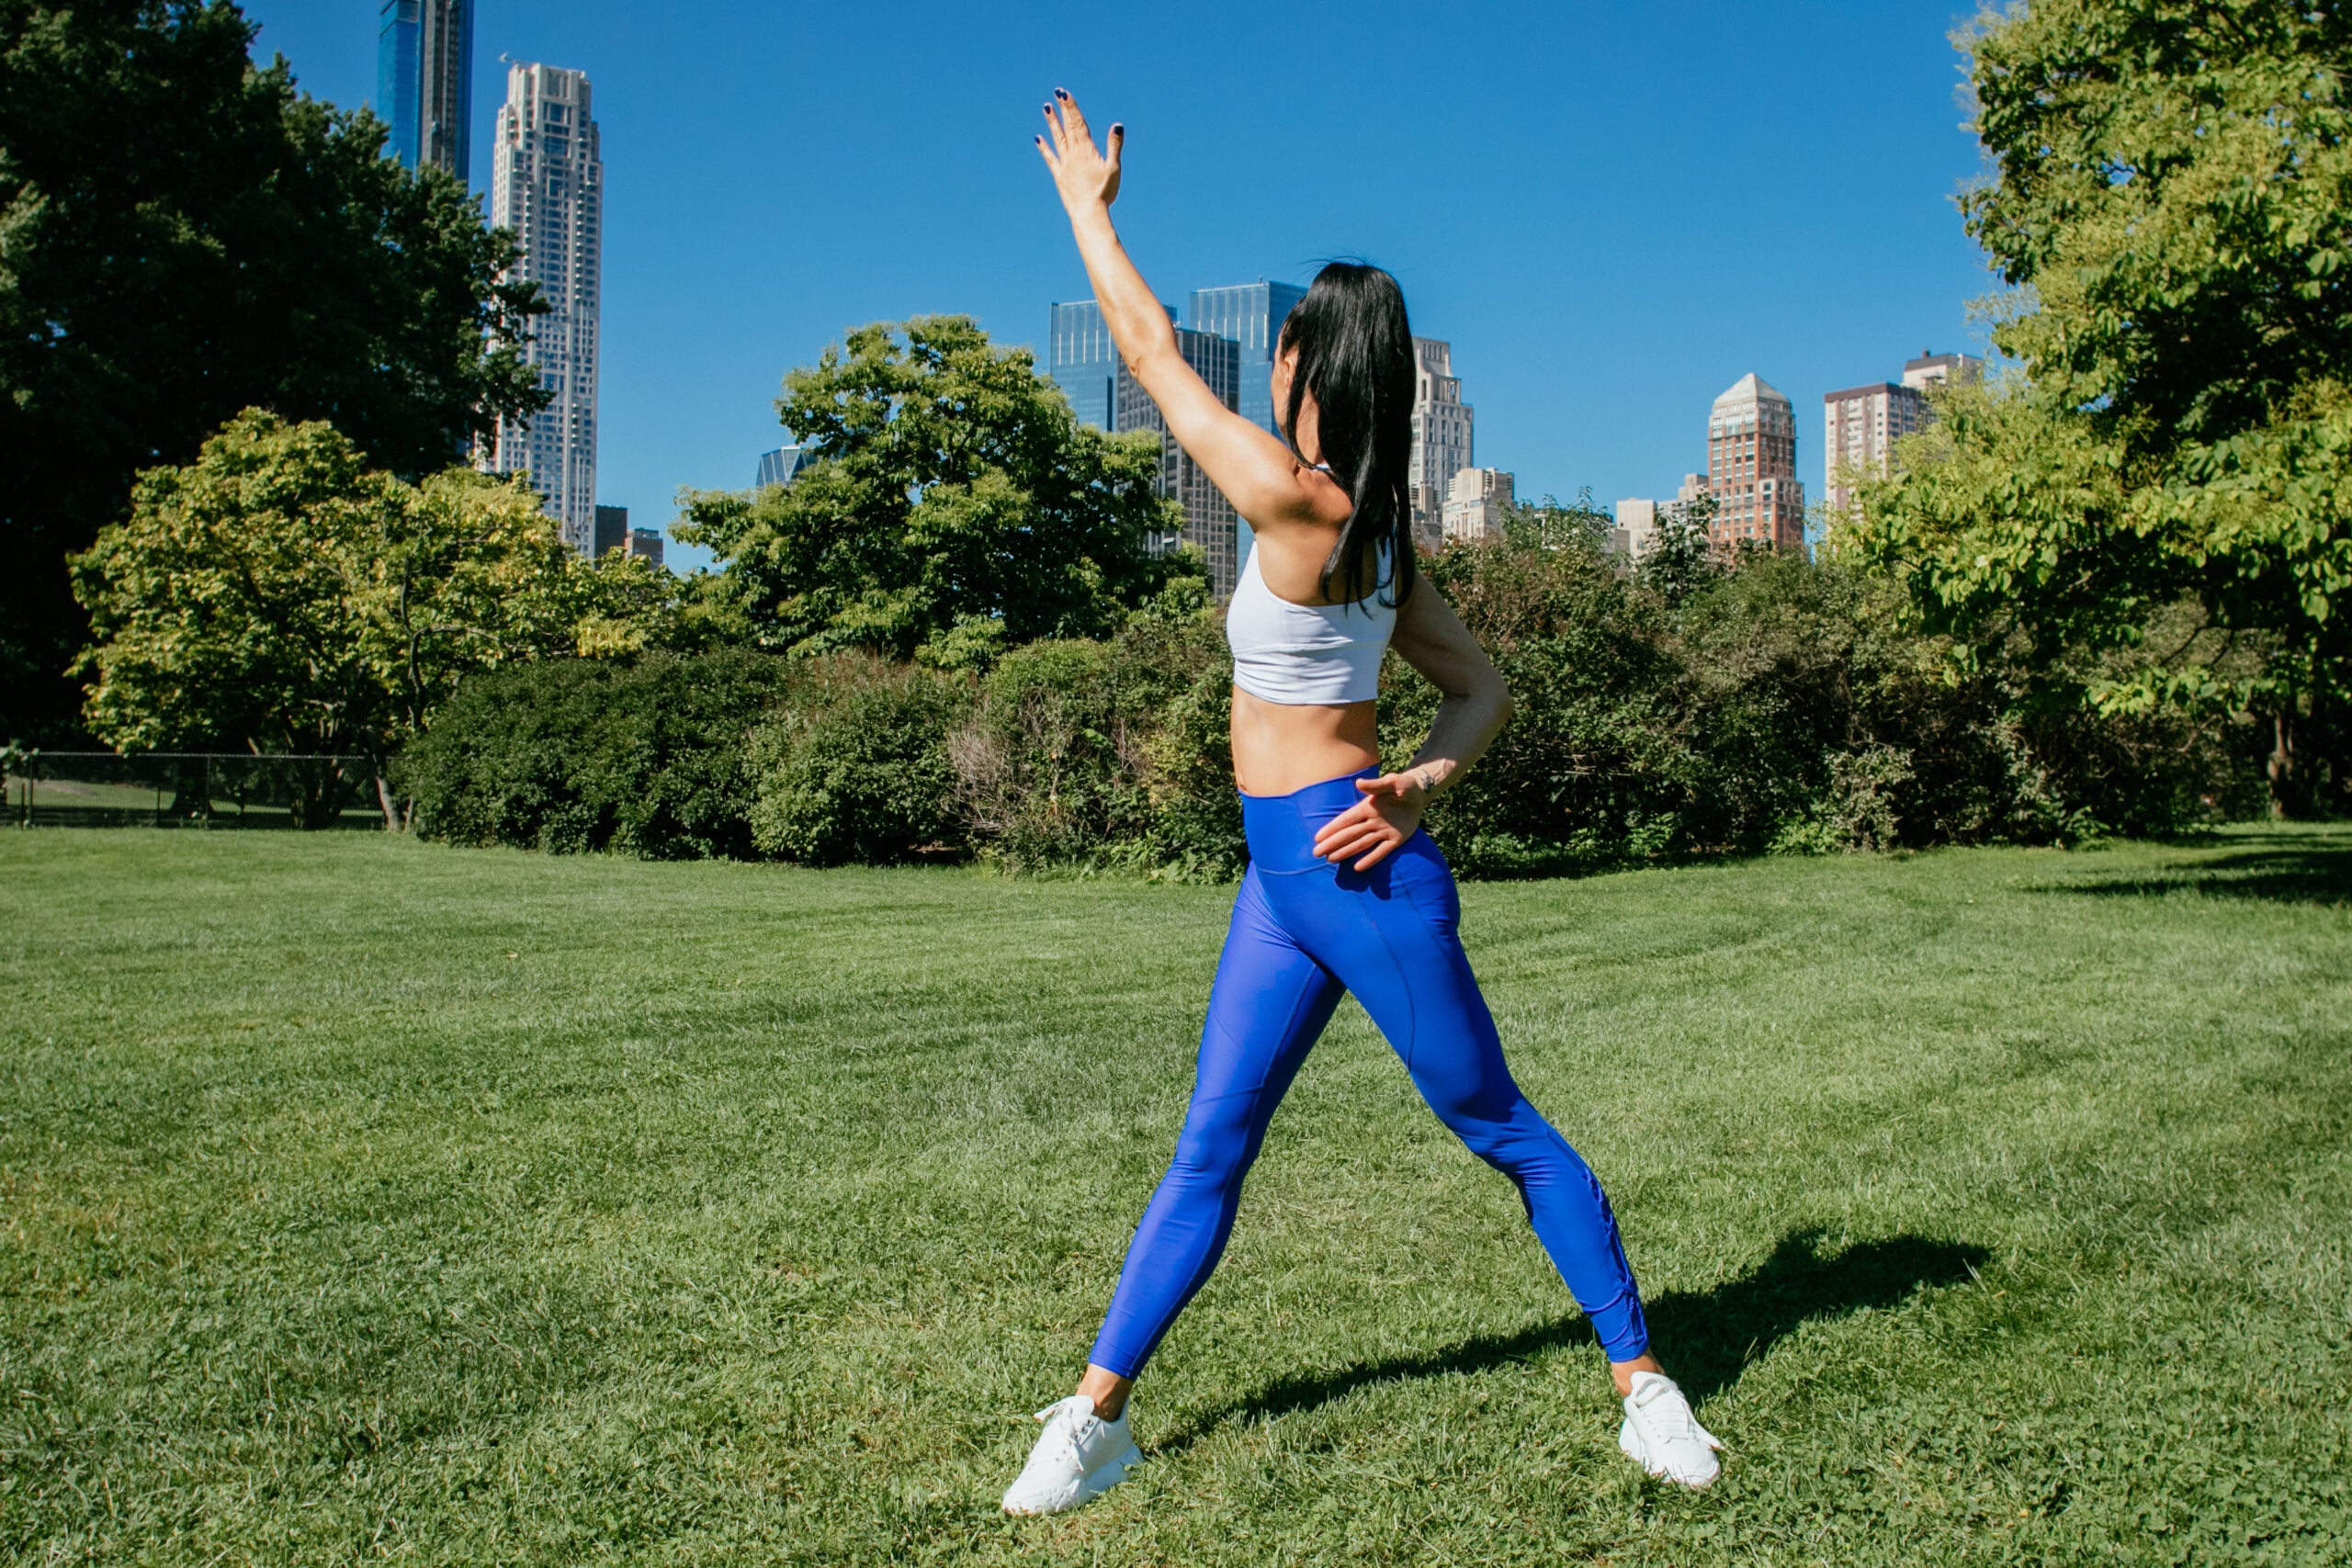 These 5 Simple Stretches Will Improve Your Flexibility And Help Your